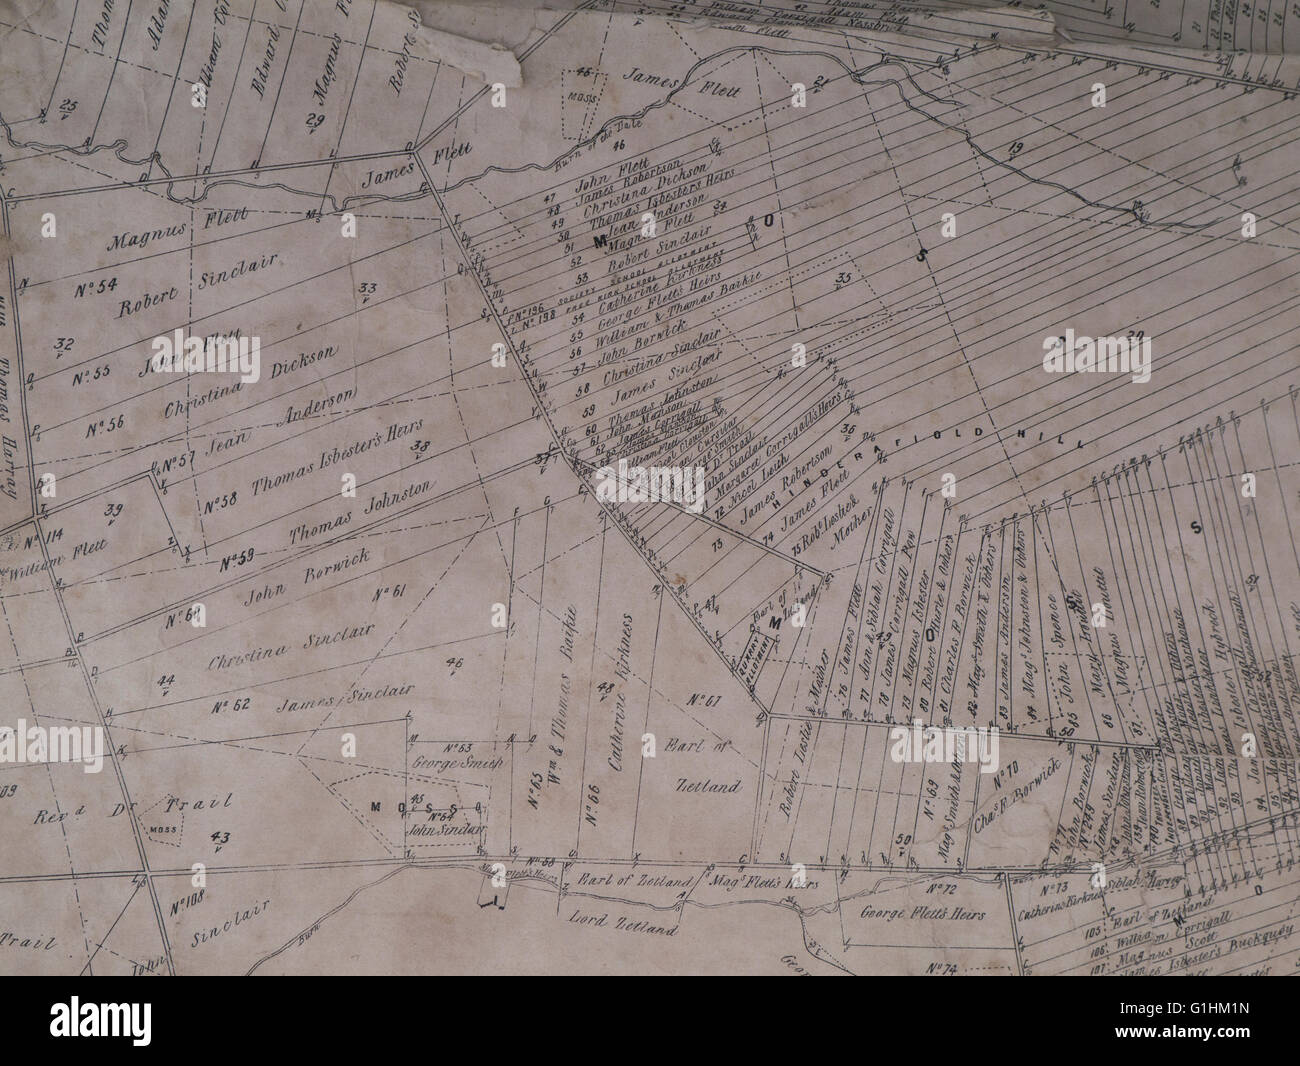 Old map of Orkney farmland Stock Photo